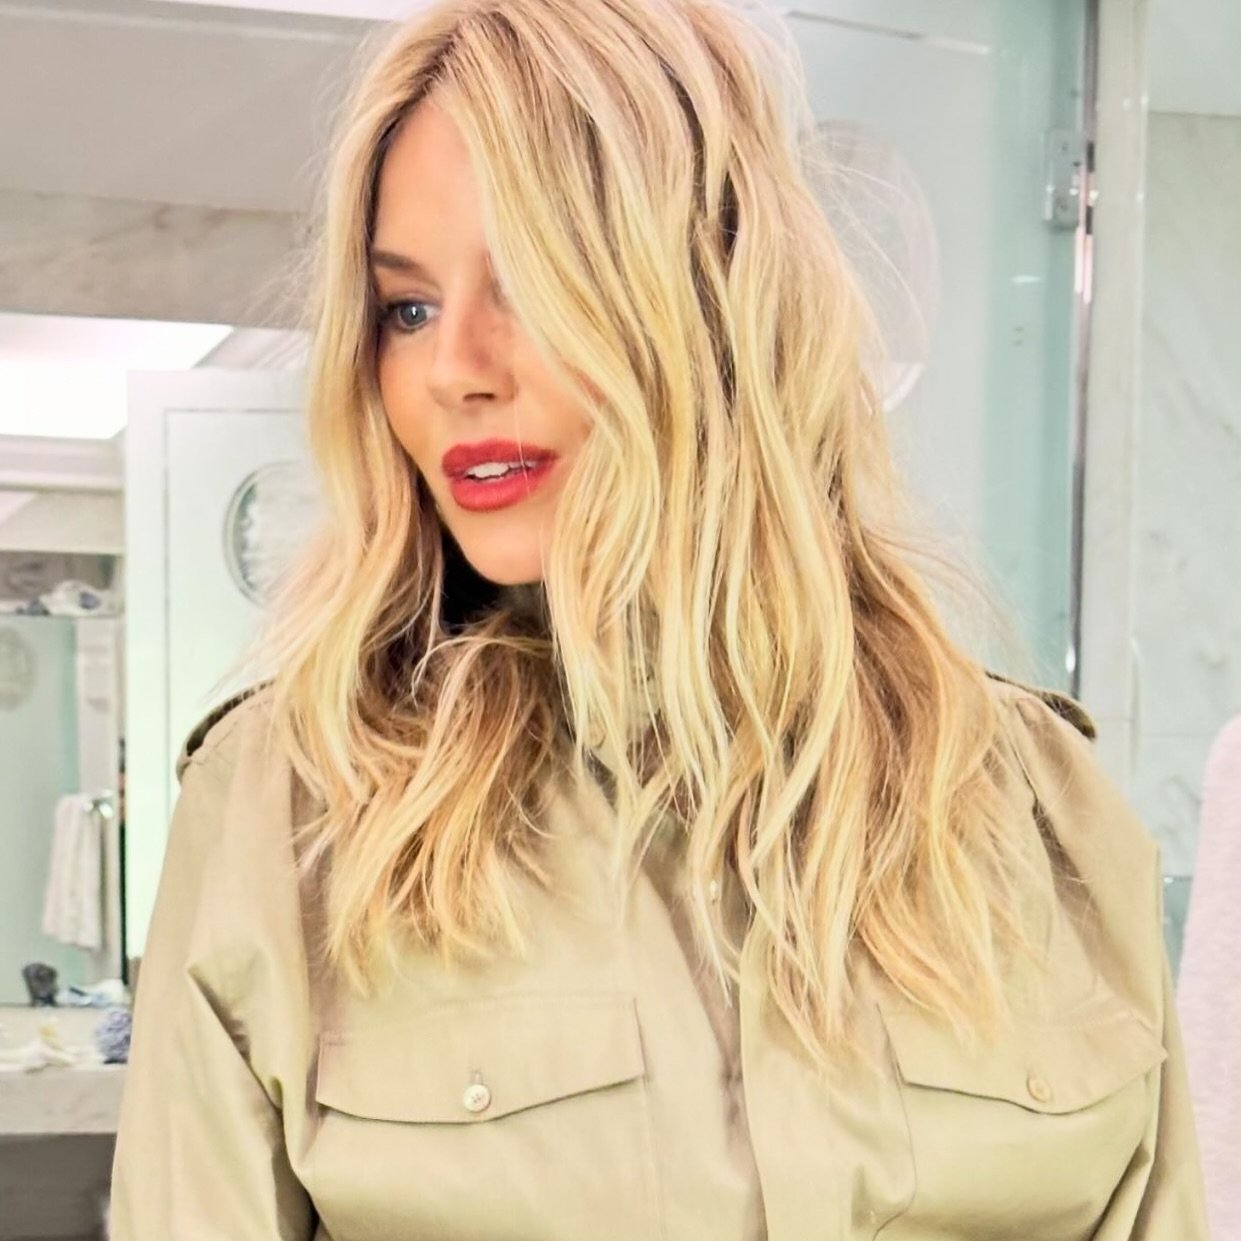 We&rsquo;re obsessed with @siennathing new blonde style!The soft waves and honey-blonde tones complement her complexion beautifully, making it a standout look. Would you consider trying out this style for yourself?
-
-
-
#BlondeBombshell #SiennaMille